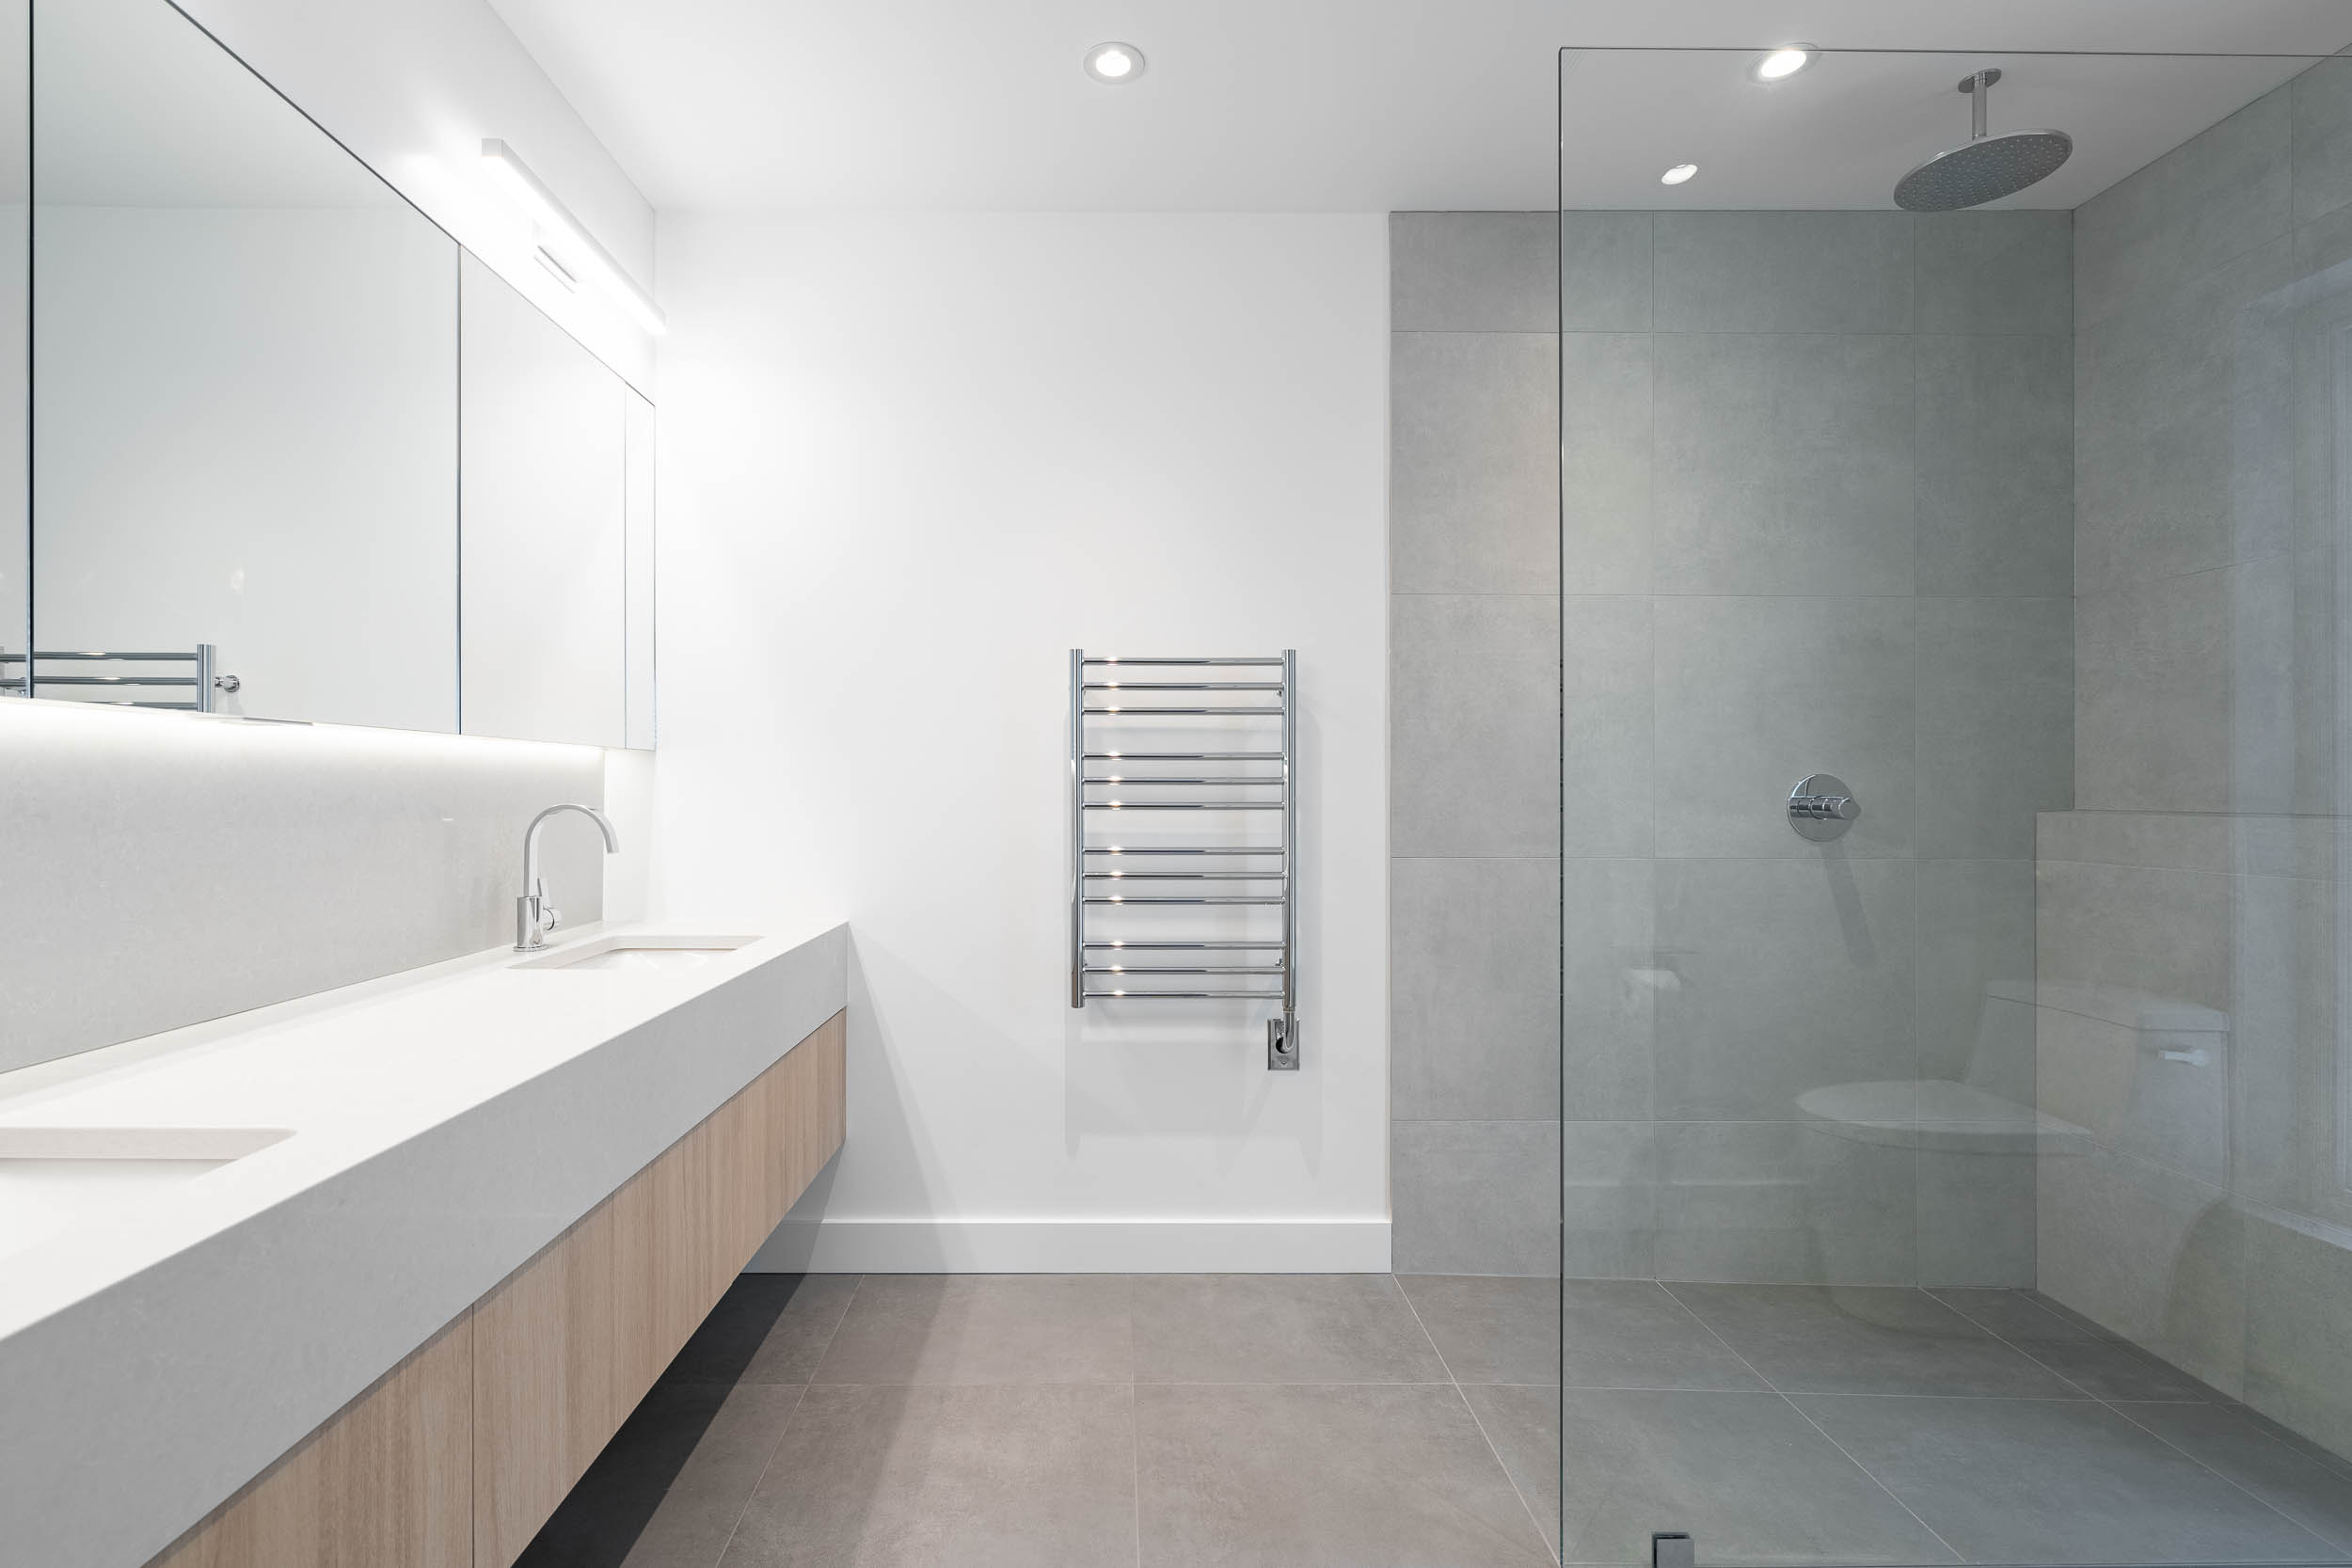 Mike's Tiles | Whistler | Tiling Services & Bathroom Renovations